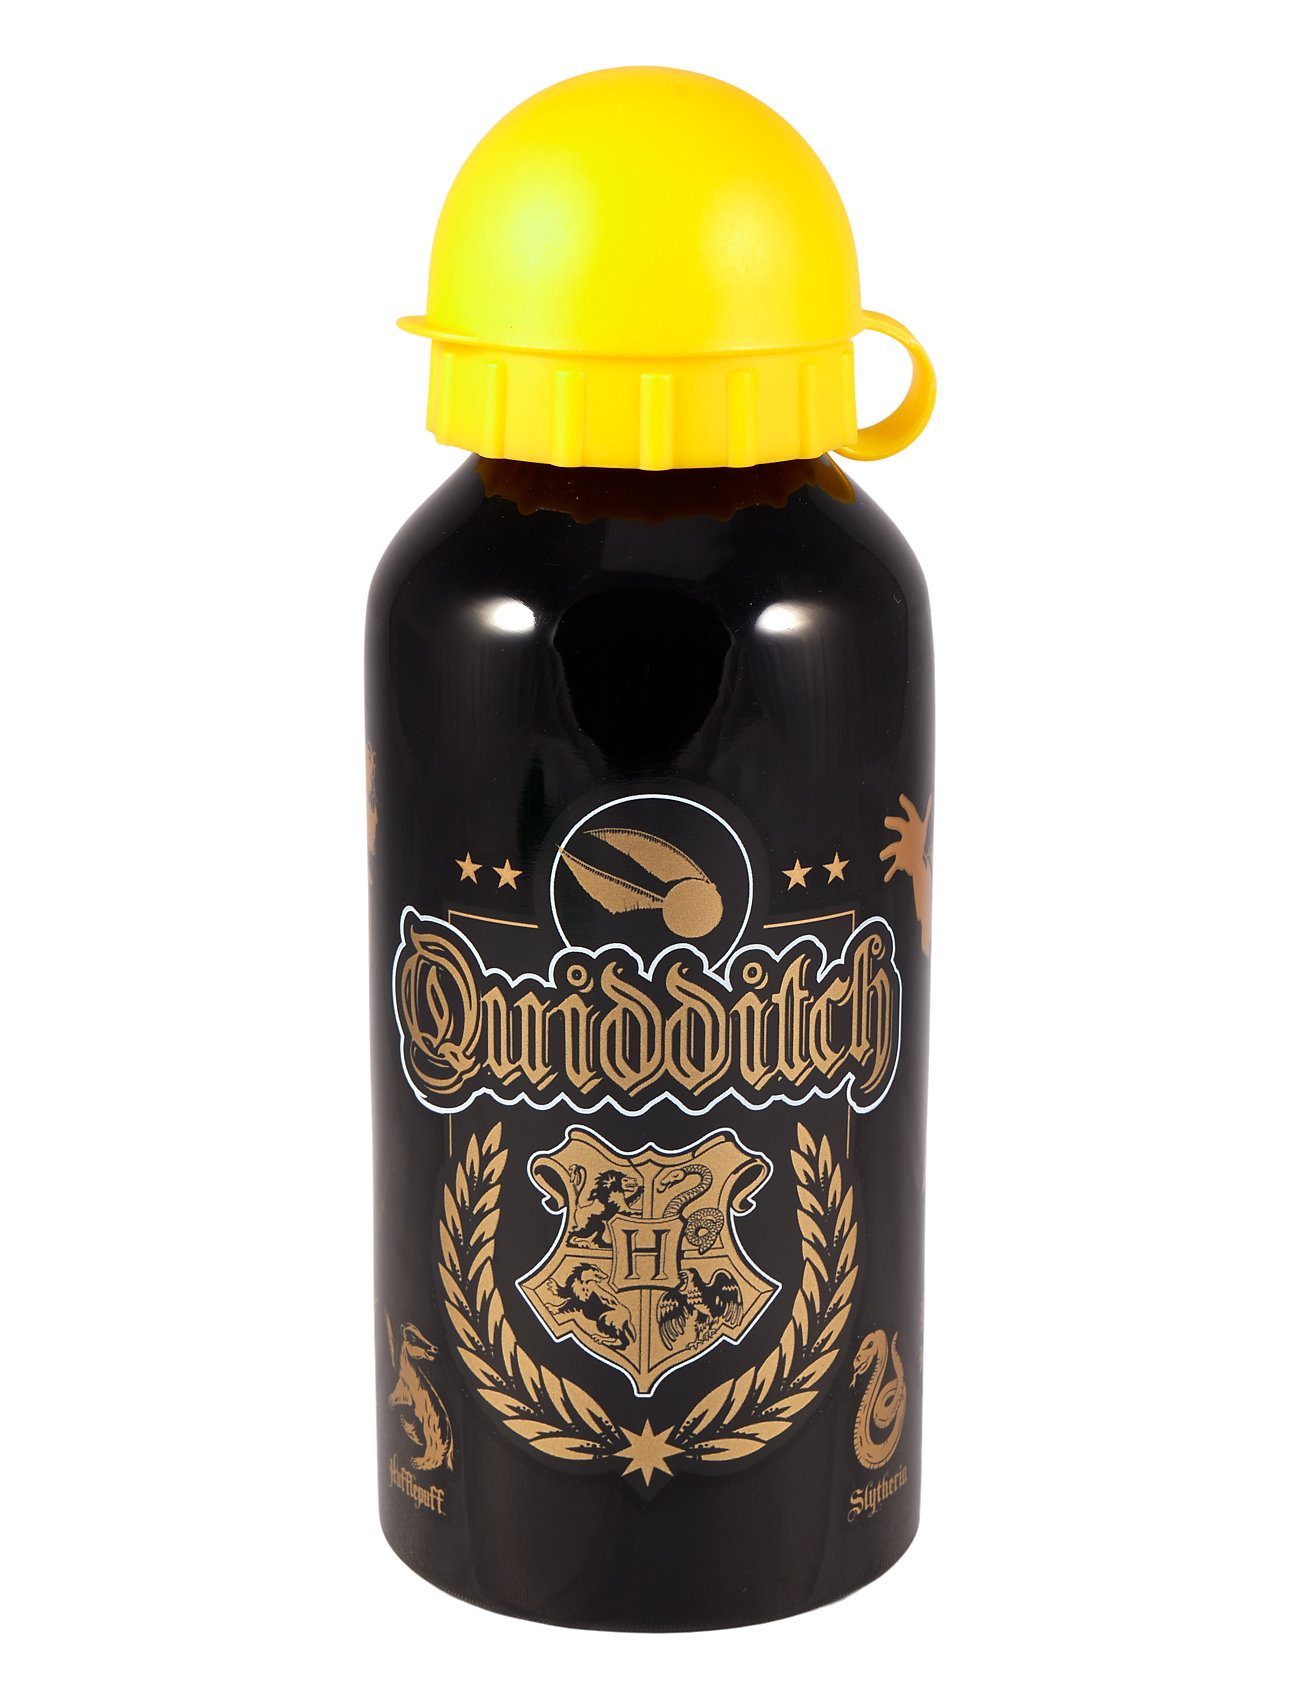 Harry Potter Quidditch Water Bottle, Alumin. Home Meal Time Black Harry Potter